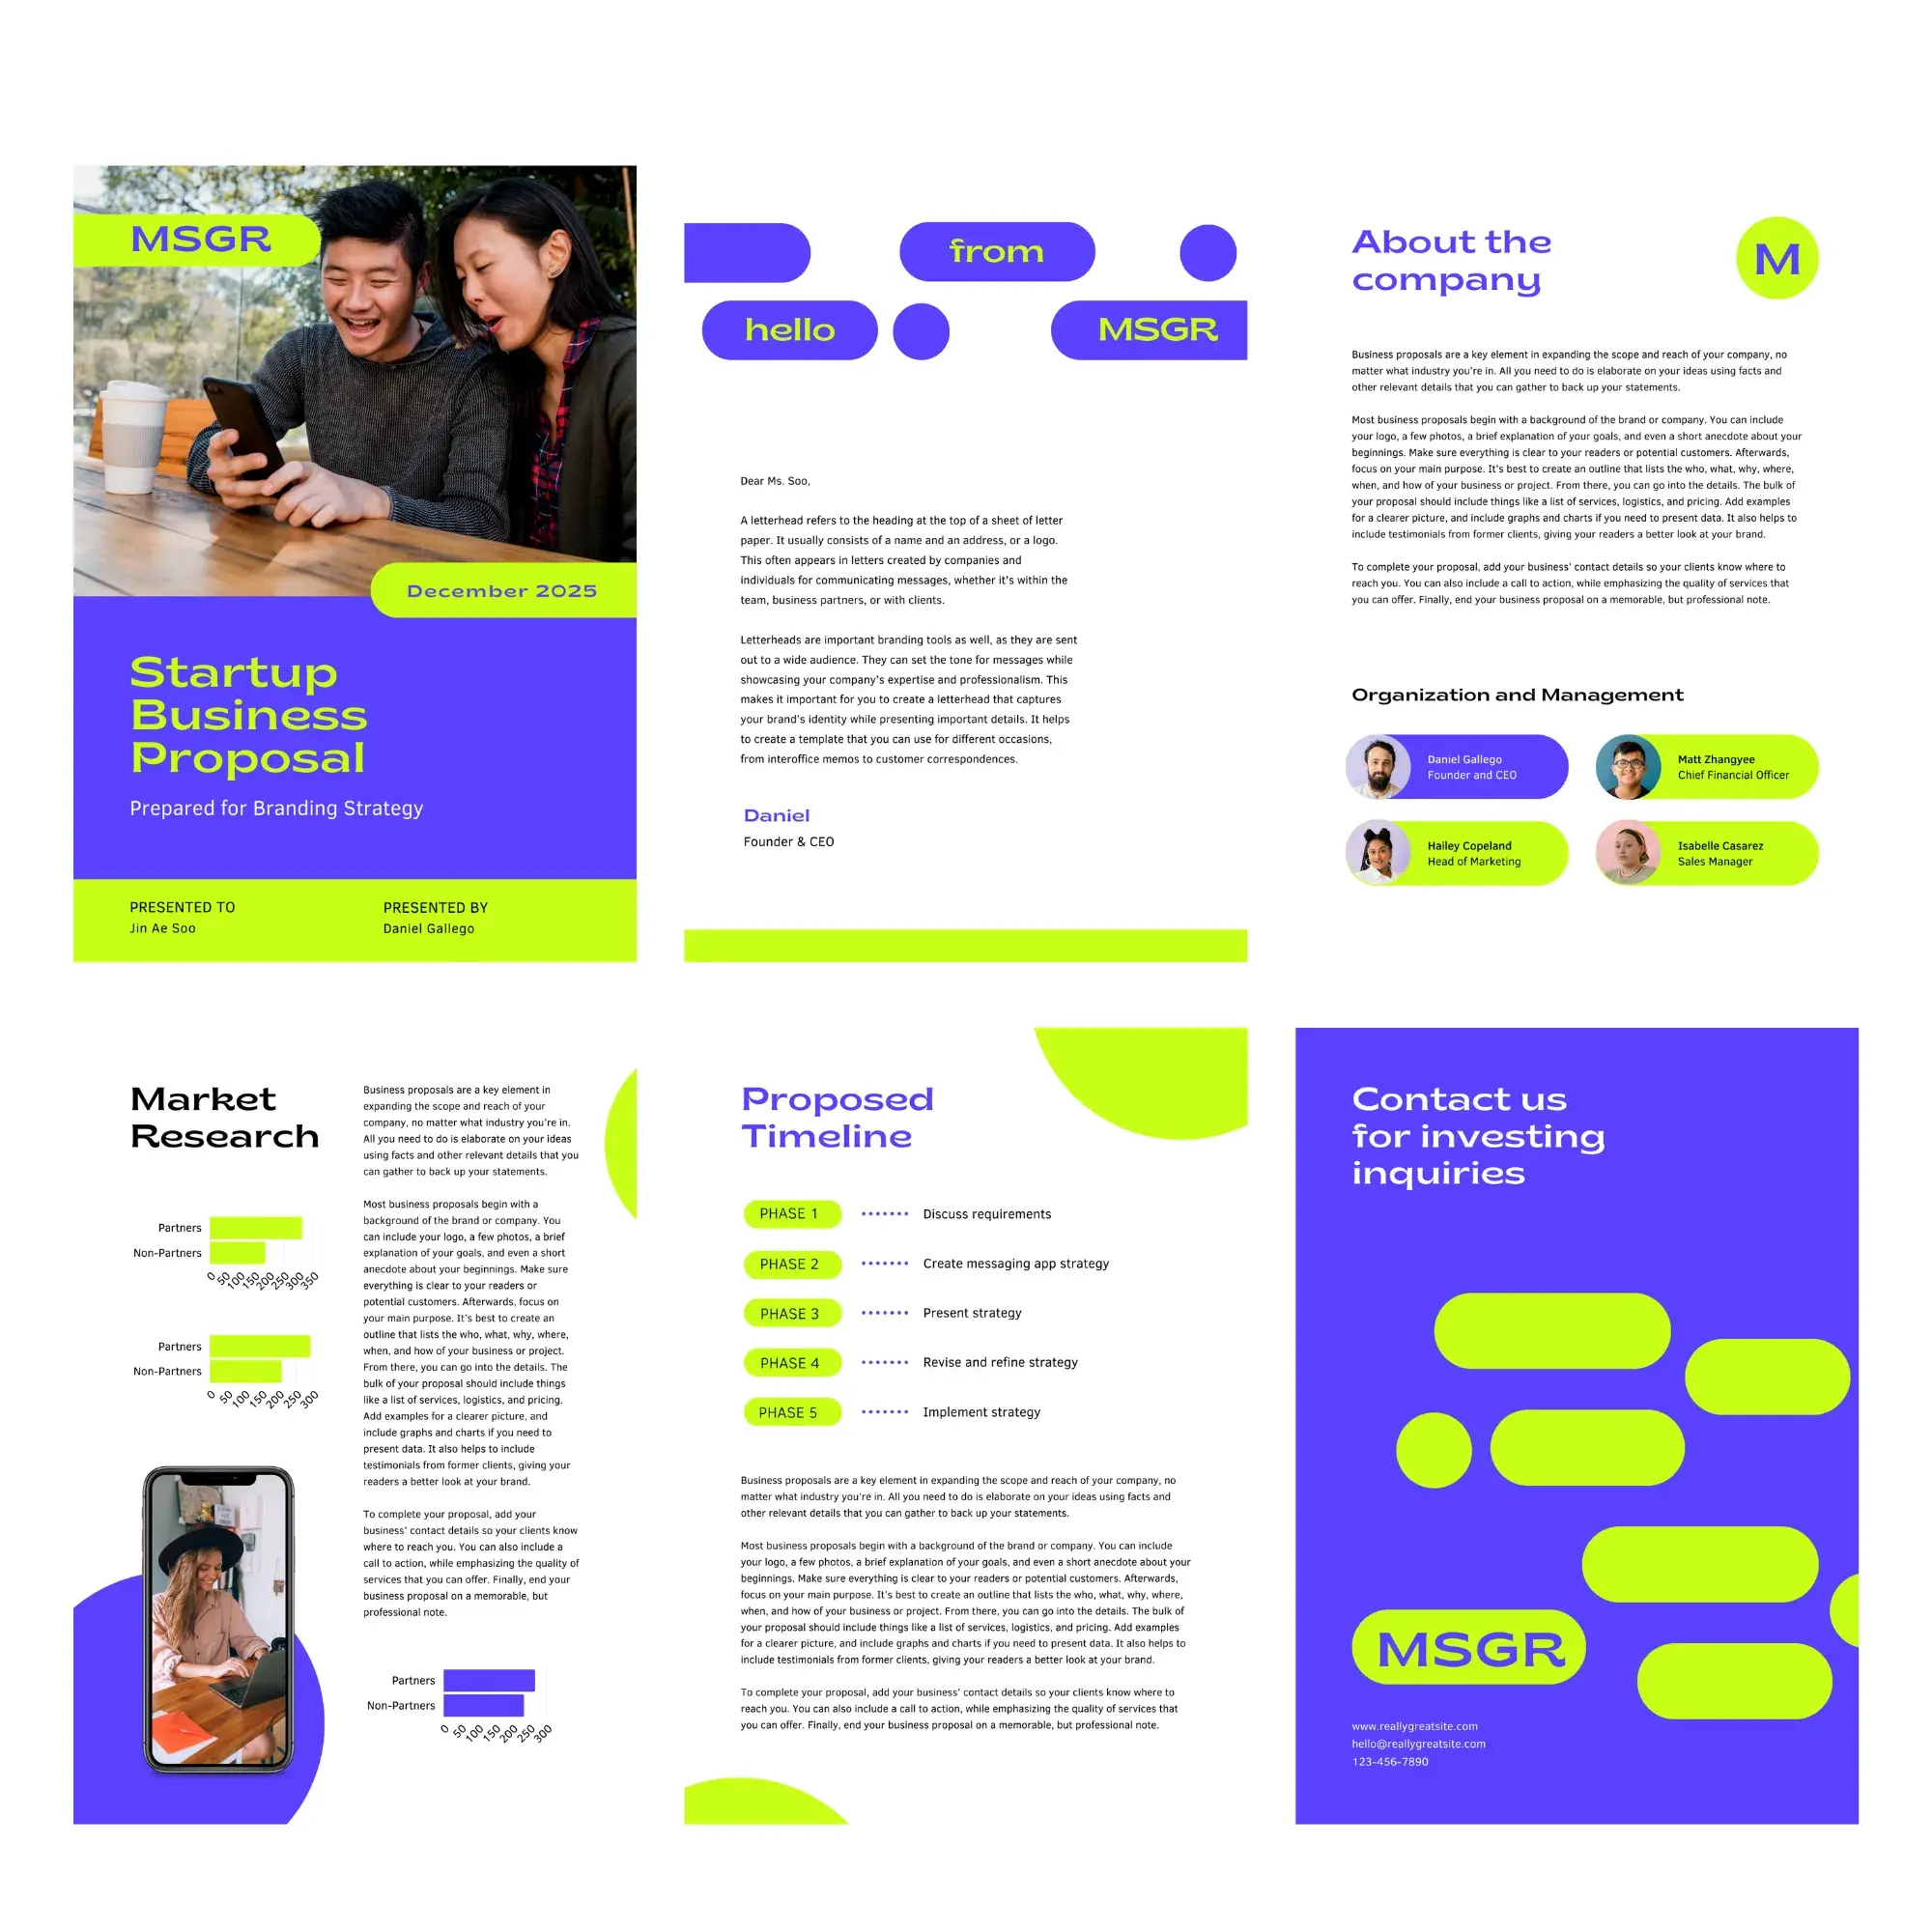 business proposal example, startup business proposal